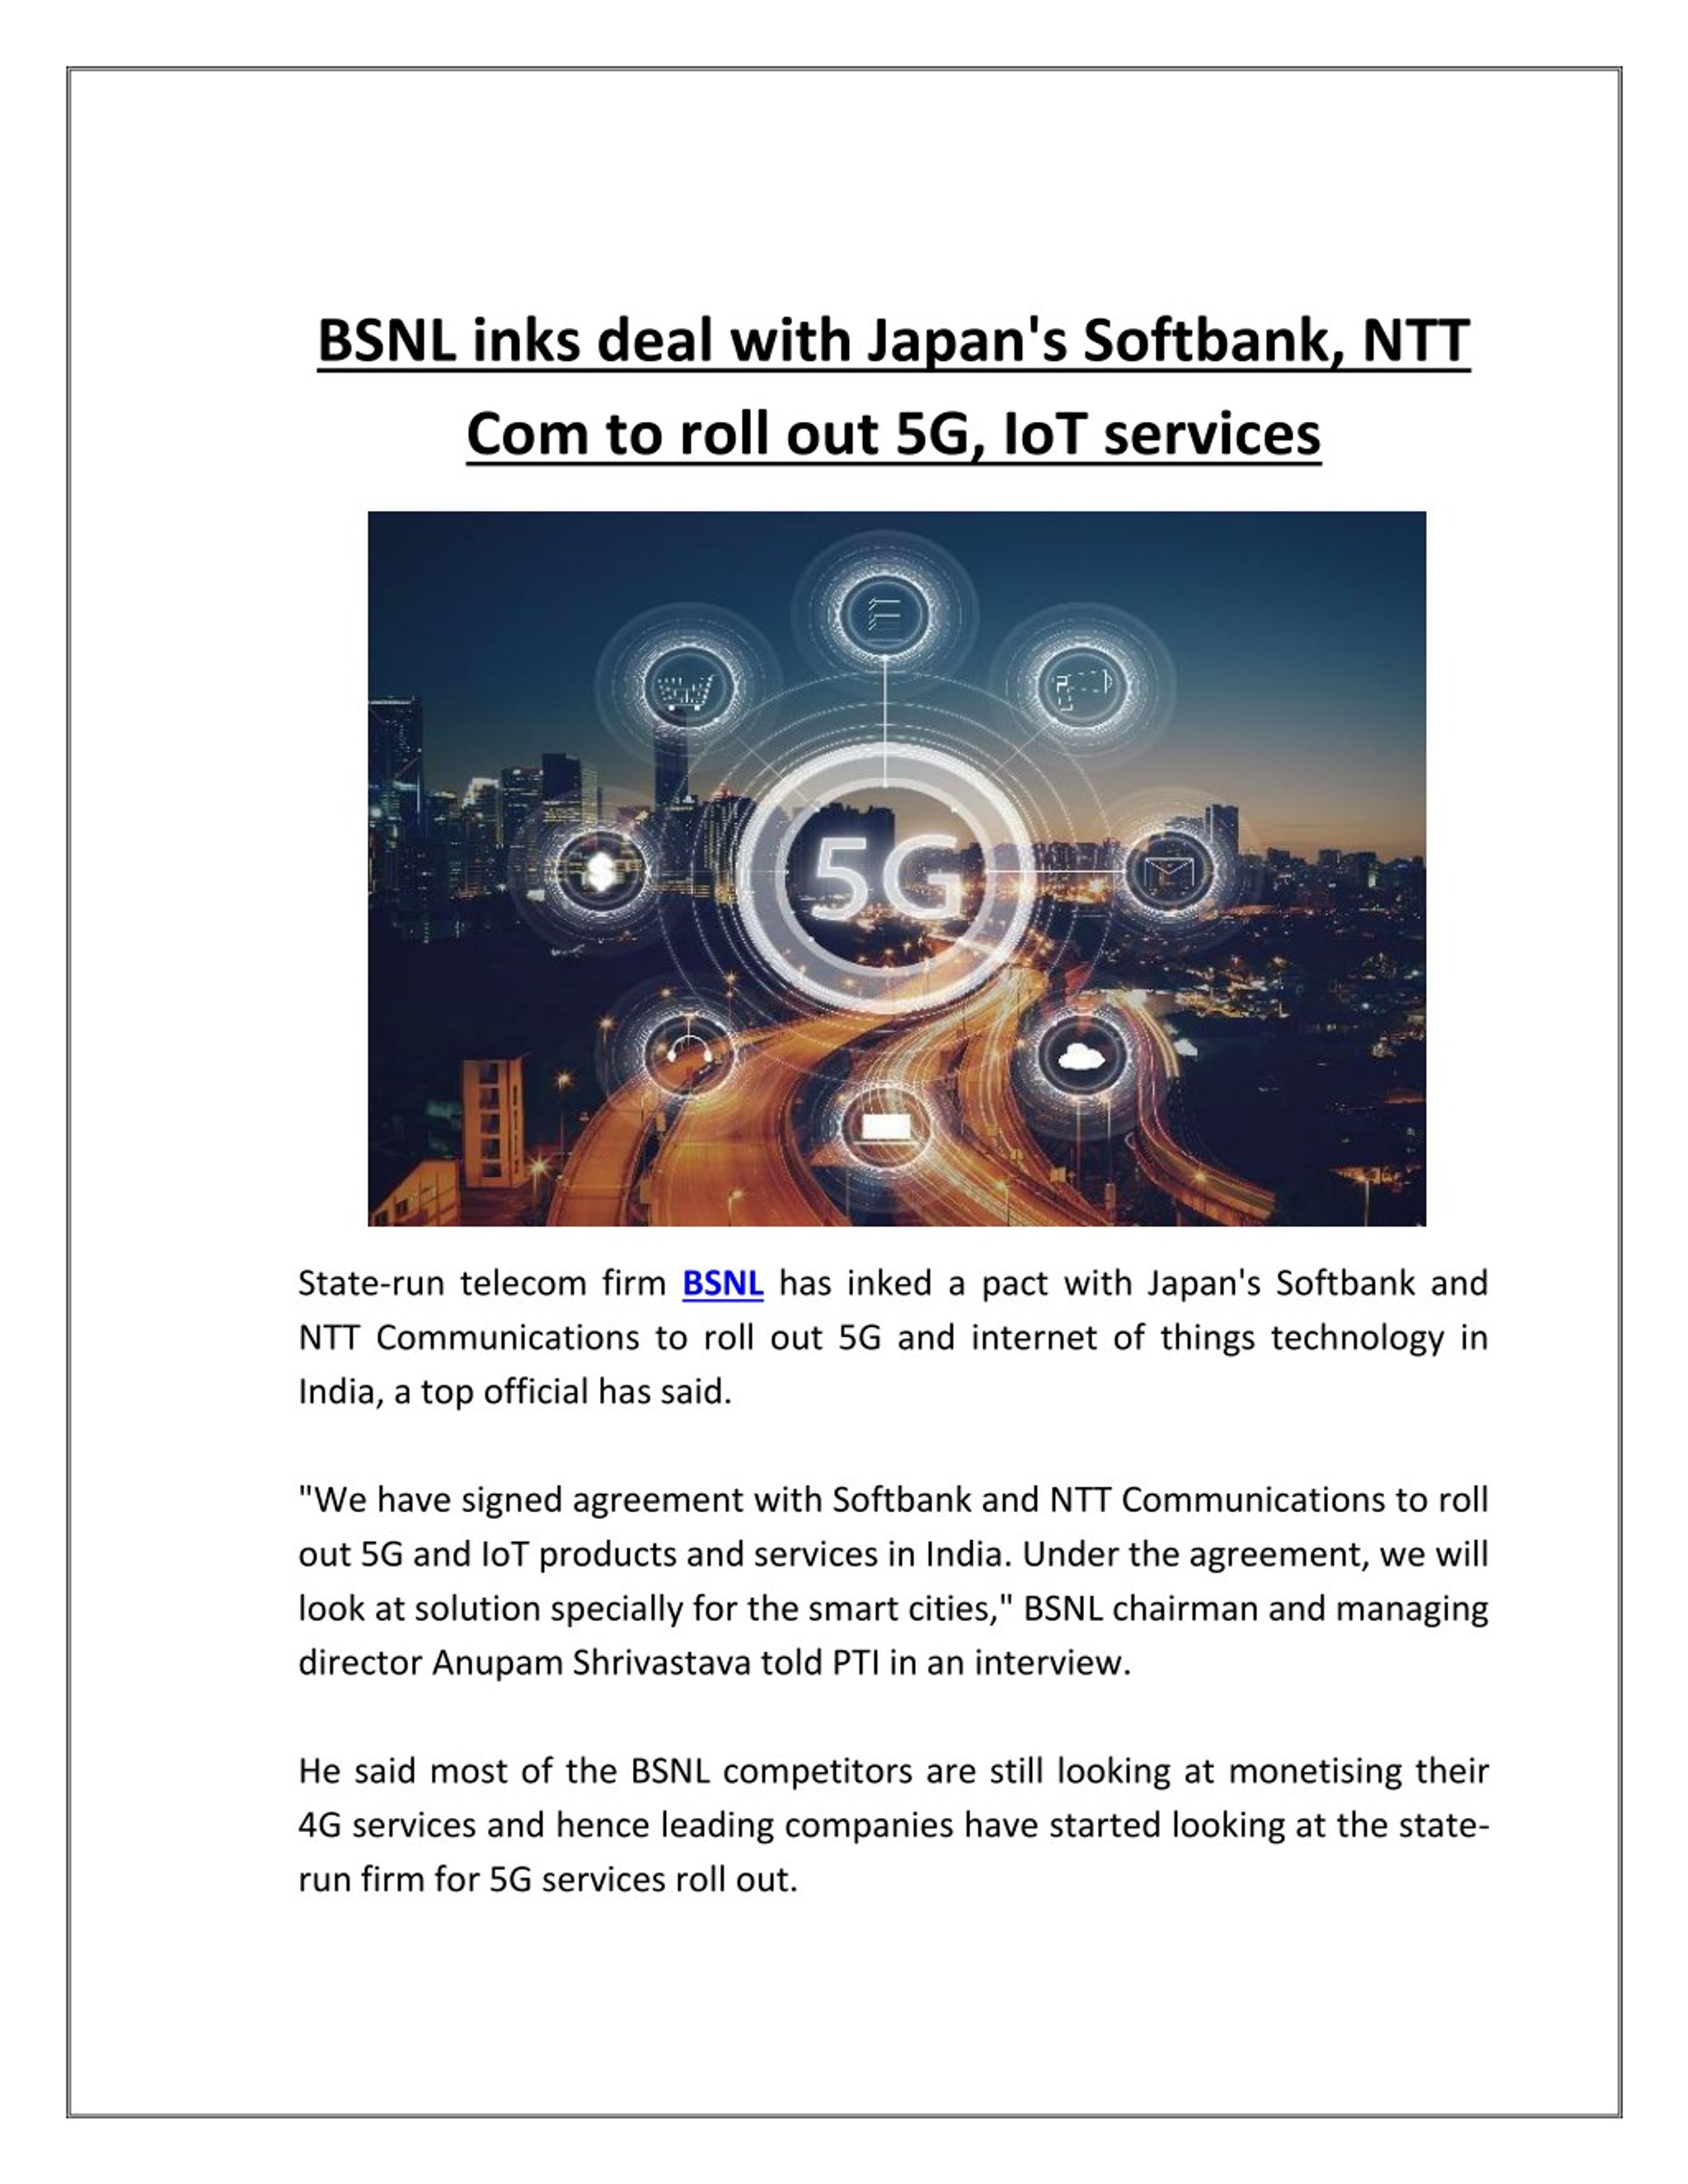 Ppt Bsnl Inks Deal With Japan S Softbank Ntt Com To Roll Out 5g Iot Services Powerpoint Presentation Id